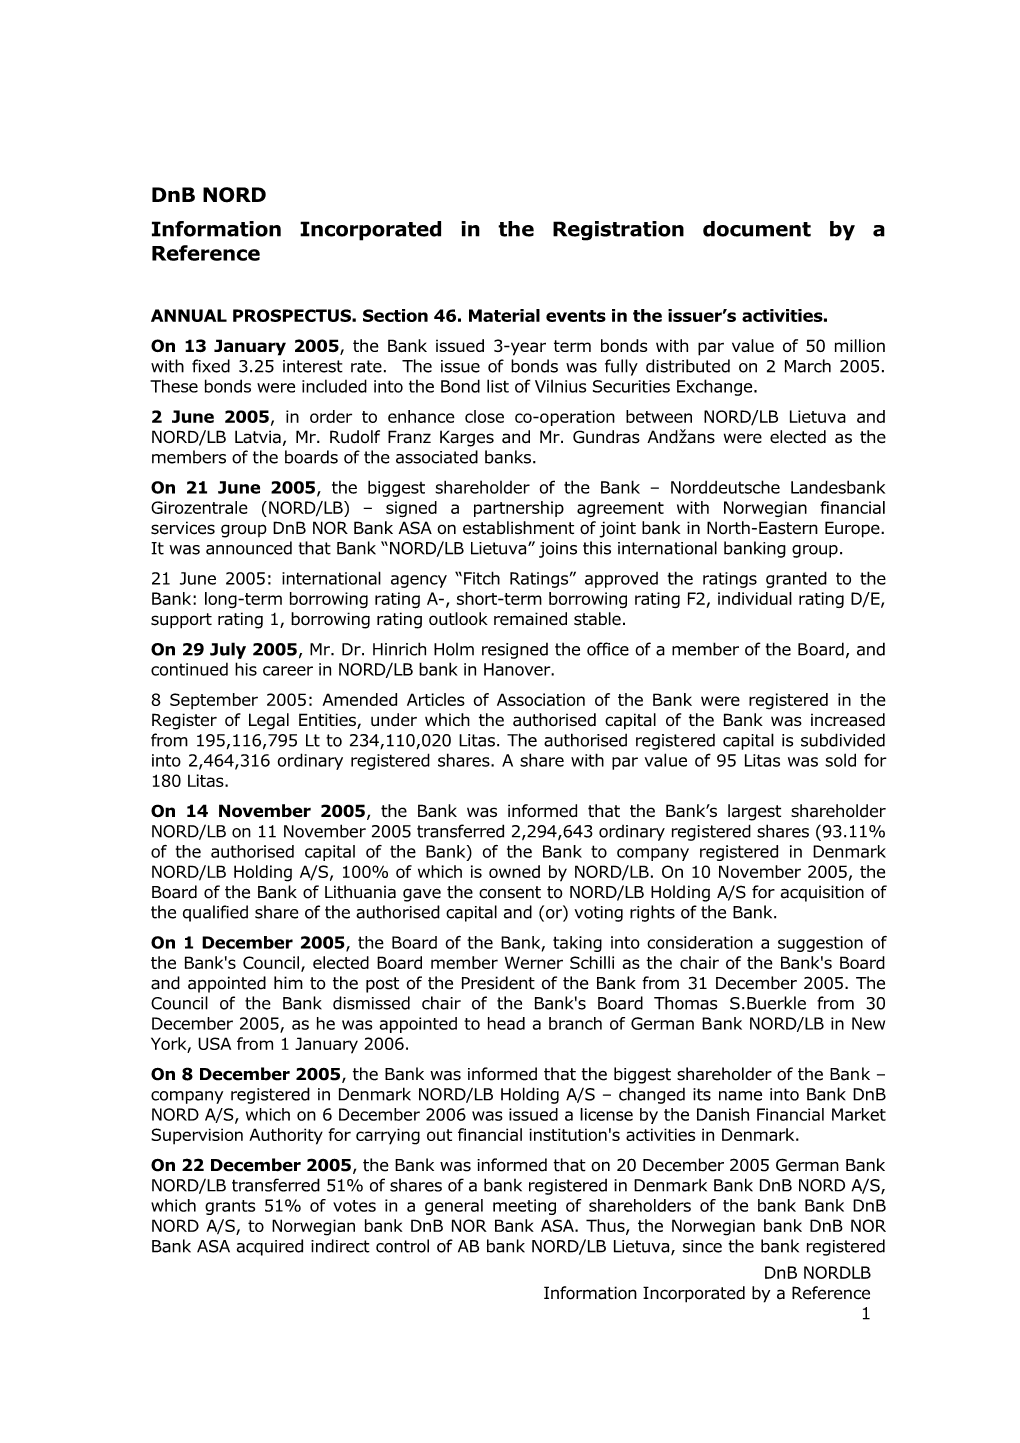 Dnb NORD Information Incorporated in the Registration Document by a Reference